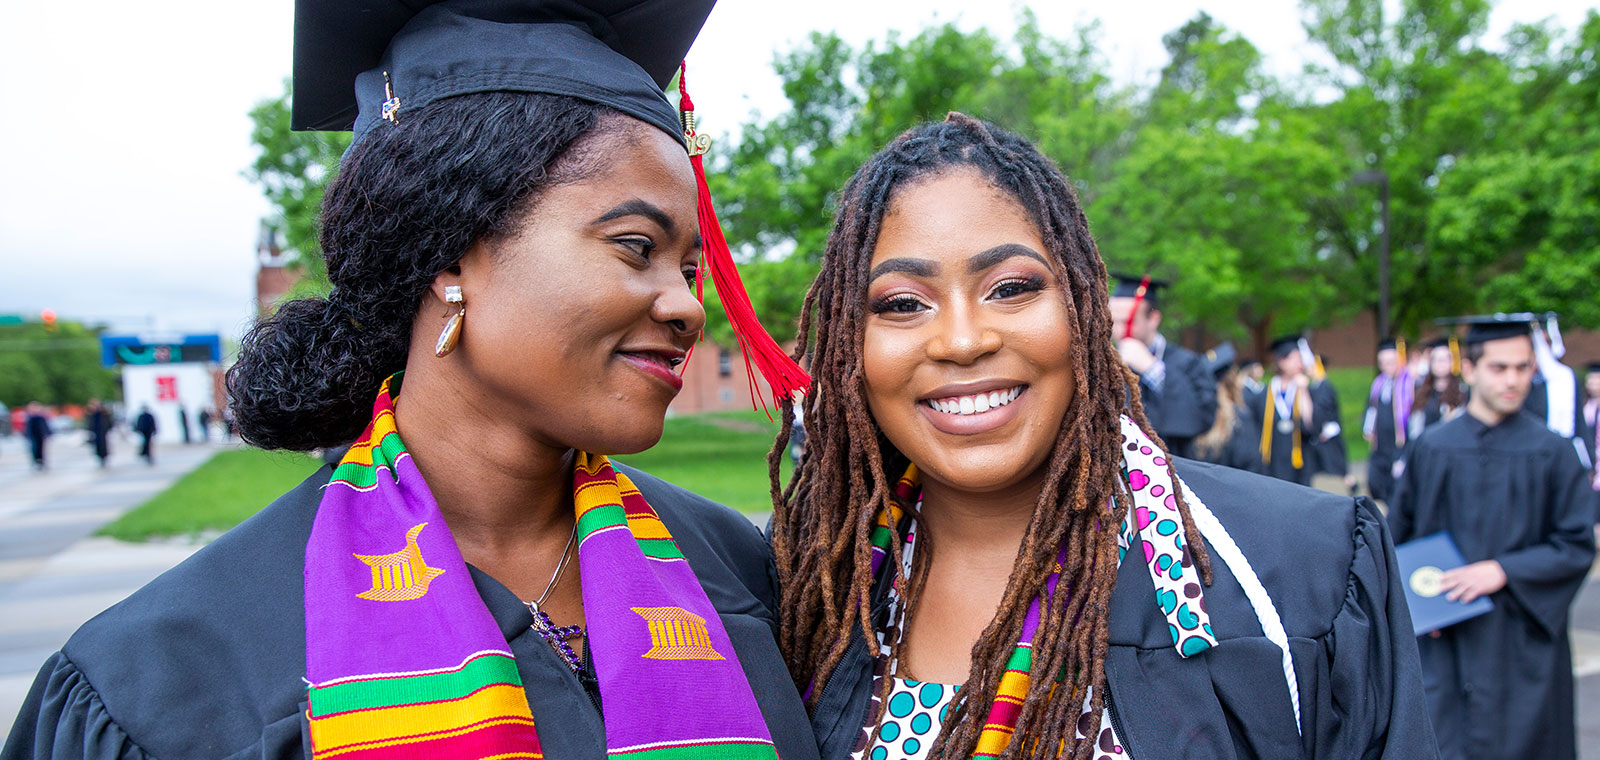 Two students at the Spring 2019 Commencement